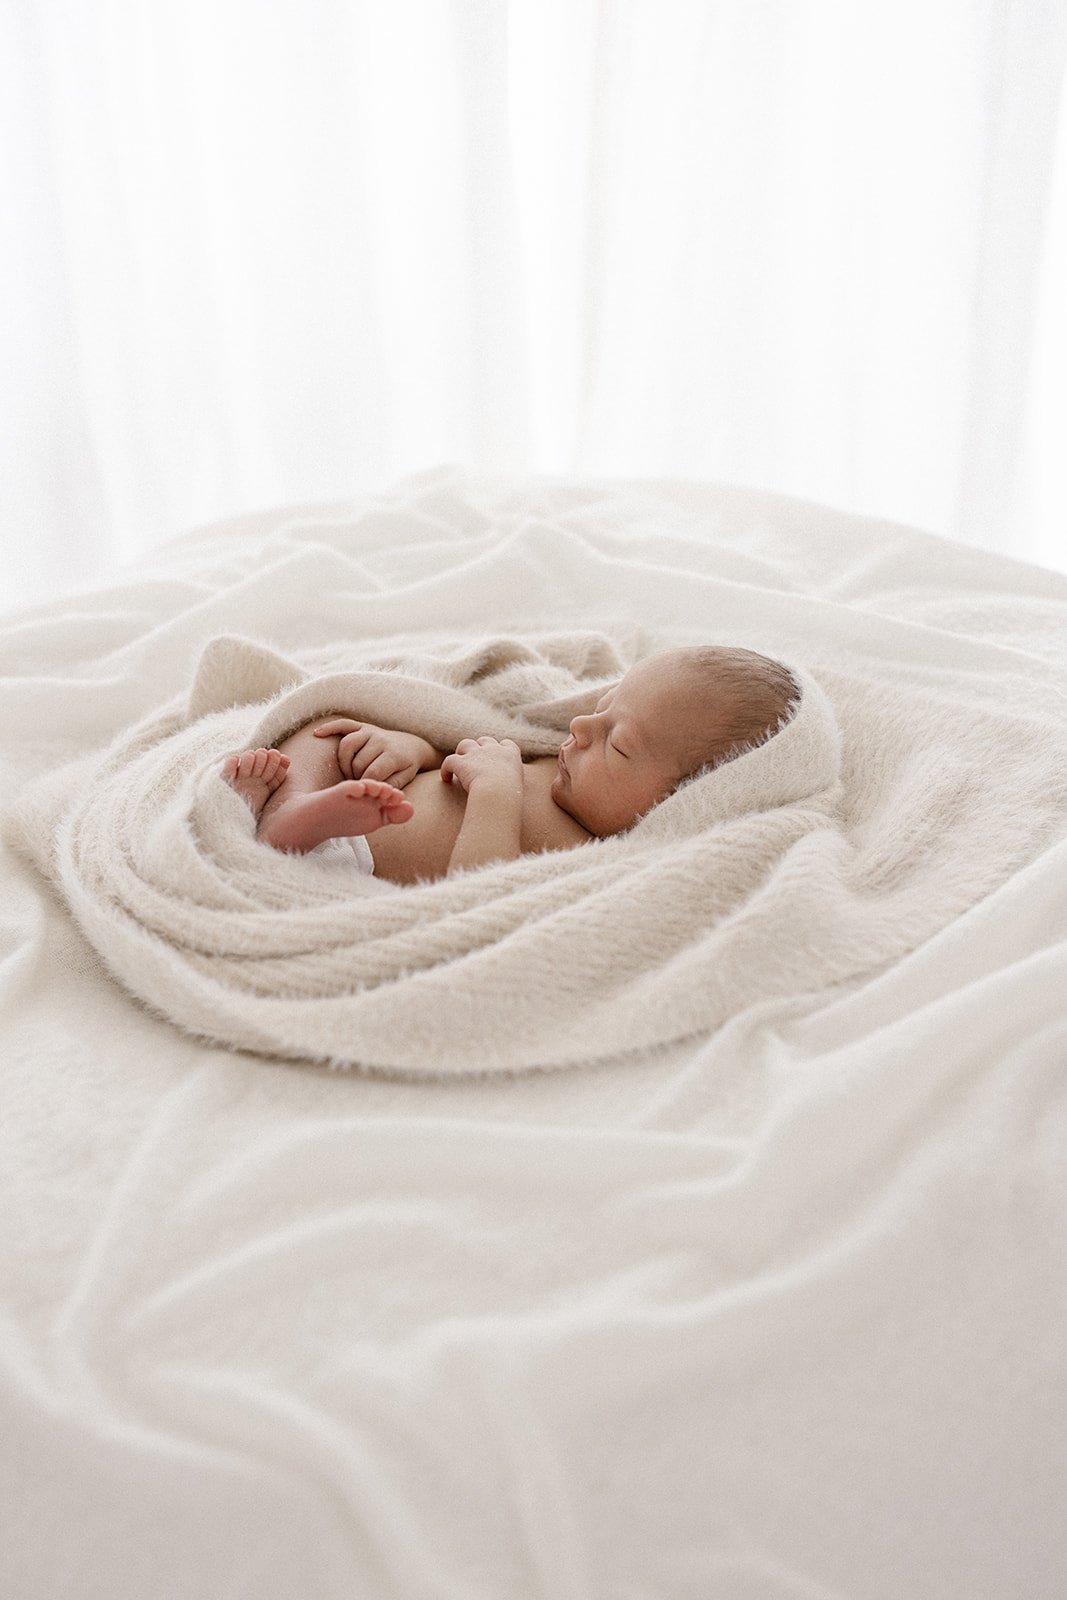 brisbane newborn baby wrapped loosely in a ruffled white blanket